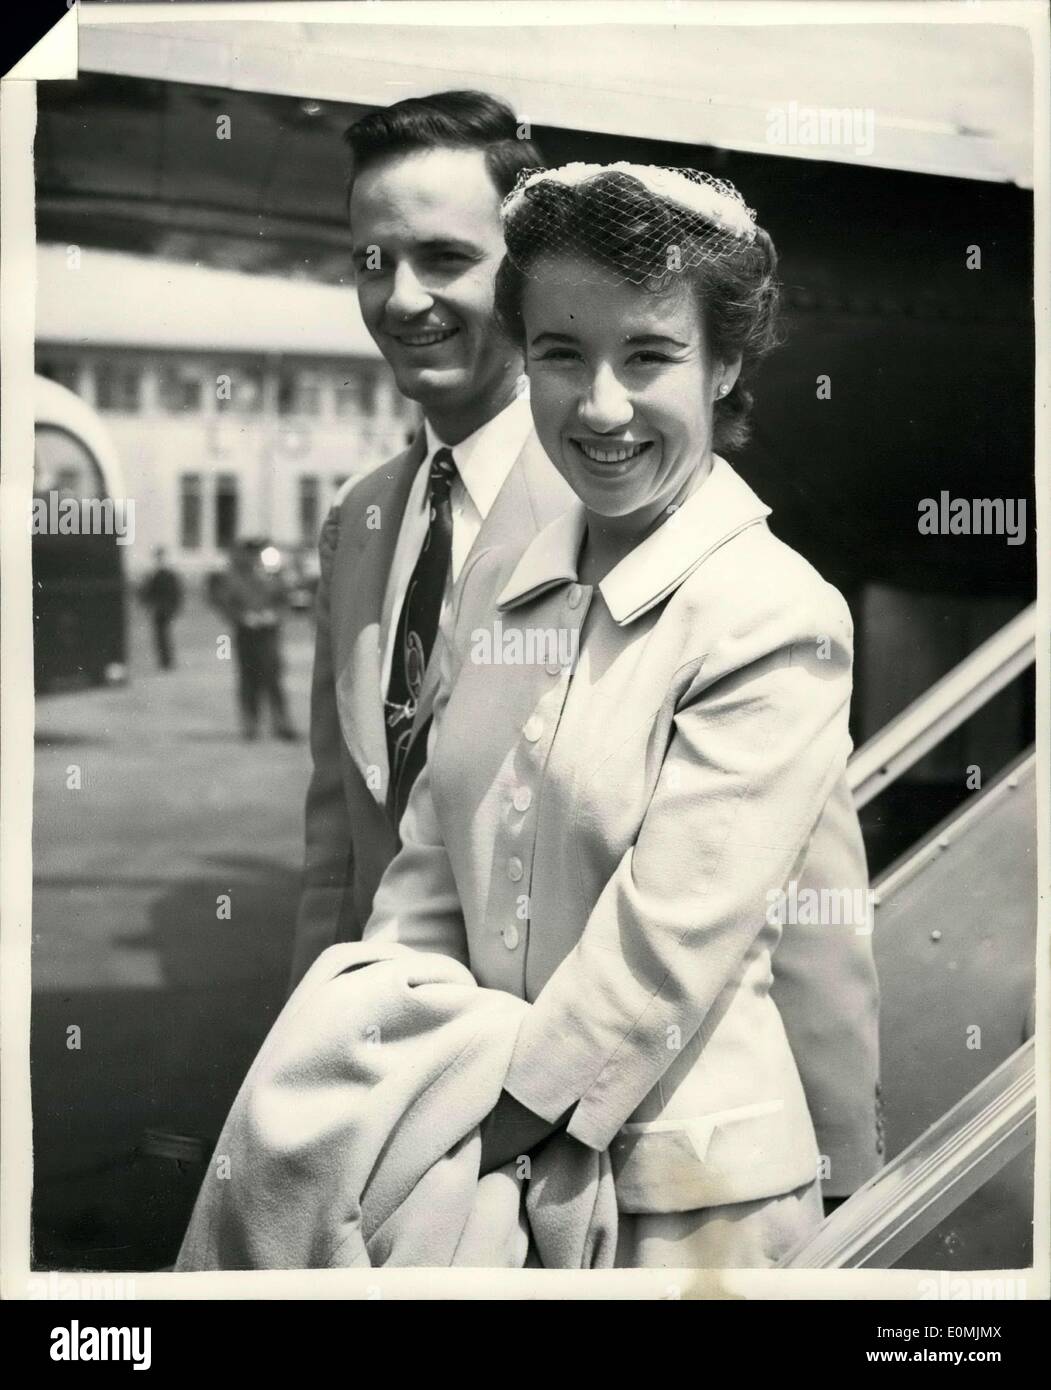 Jun. 17, 1955 - Maureen Connolly Arrives In London On Honeymoon: Maureen Connolly the young American World Tennis Champion-and her husband of four dauys-Norman Brinker-American Olympic Horseman arrived at London report on the Wimbledon Championships. She is not defending her title. Photo shows. Maureen Connolly and husband Norman Brinker walk away from the aircraft hand-in-hand on their arrival at London Airport this morning. Stock Photo